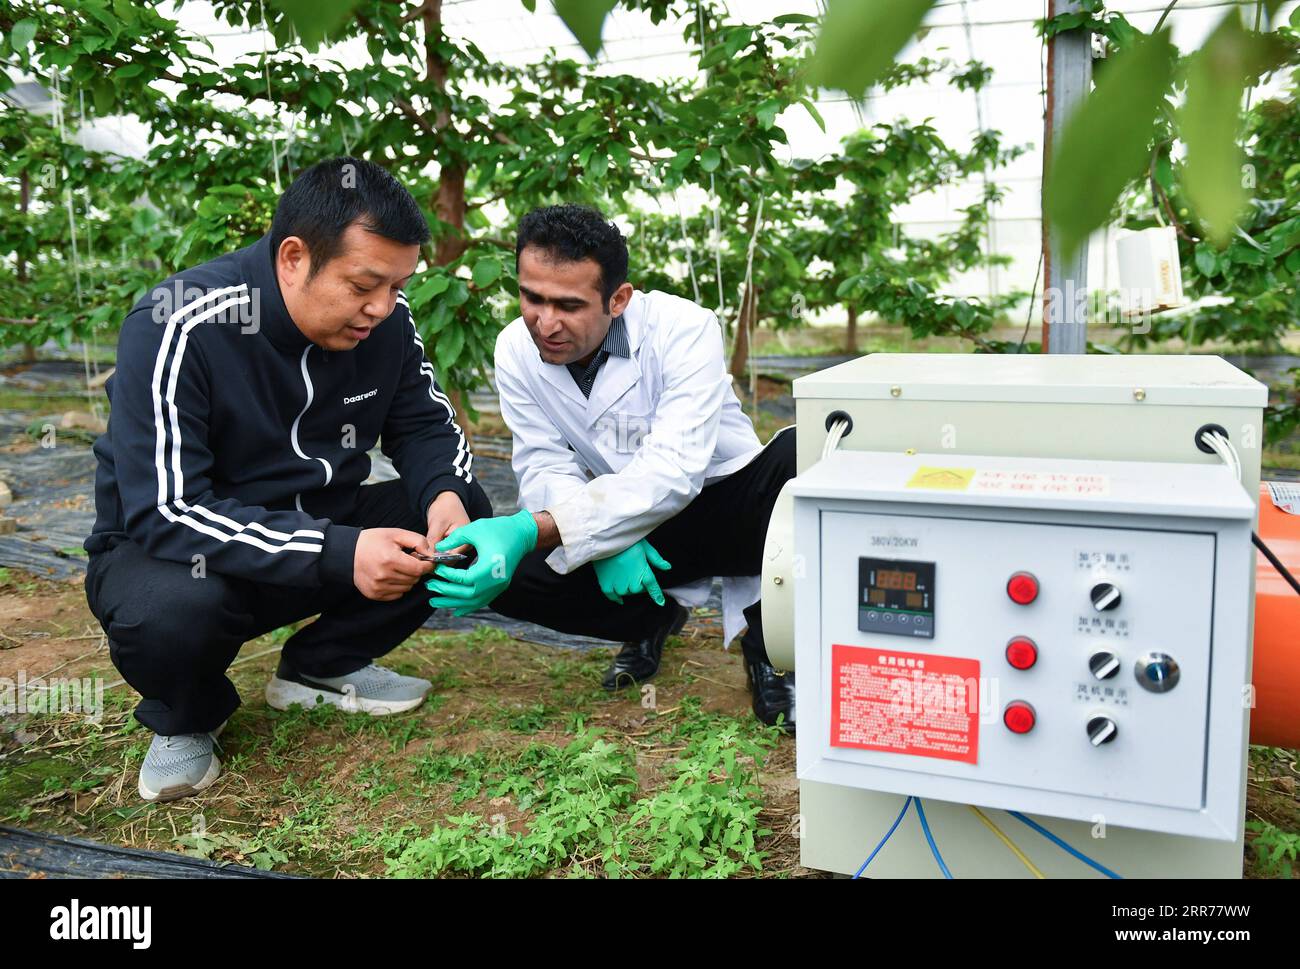 210318 -- XI AN, March 18, 2021 -- Abdul Ghaffar Shar R talks with staff member Li Haiping about greenhouse equipment at a cooperative of Yangling agricultural hi-tech industrial demonstration zone in northwest China s Shaanxi Province, March 17, 2021. Abdul Ghaffar Shar, 30, is a Pakistani doctoral student in China s Northwest Agriculture and Forestry University NWAFU. Shar is doing plant nutrition research for his doctoral degree. After receiving his bachelor s degree in agriculture from Sindh Agriculture University in Pakistan in 2014, Shar decided to further his studies in China s NWAFU. S Stock Photo